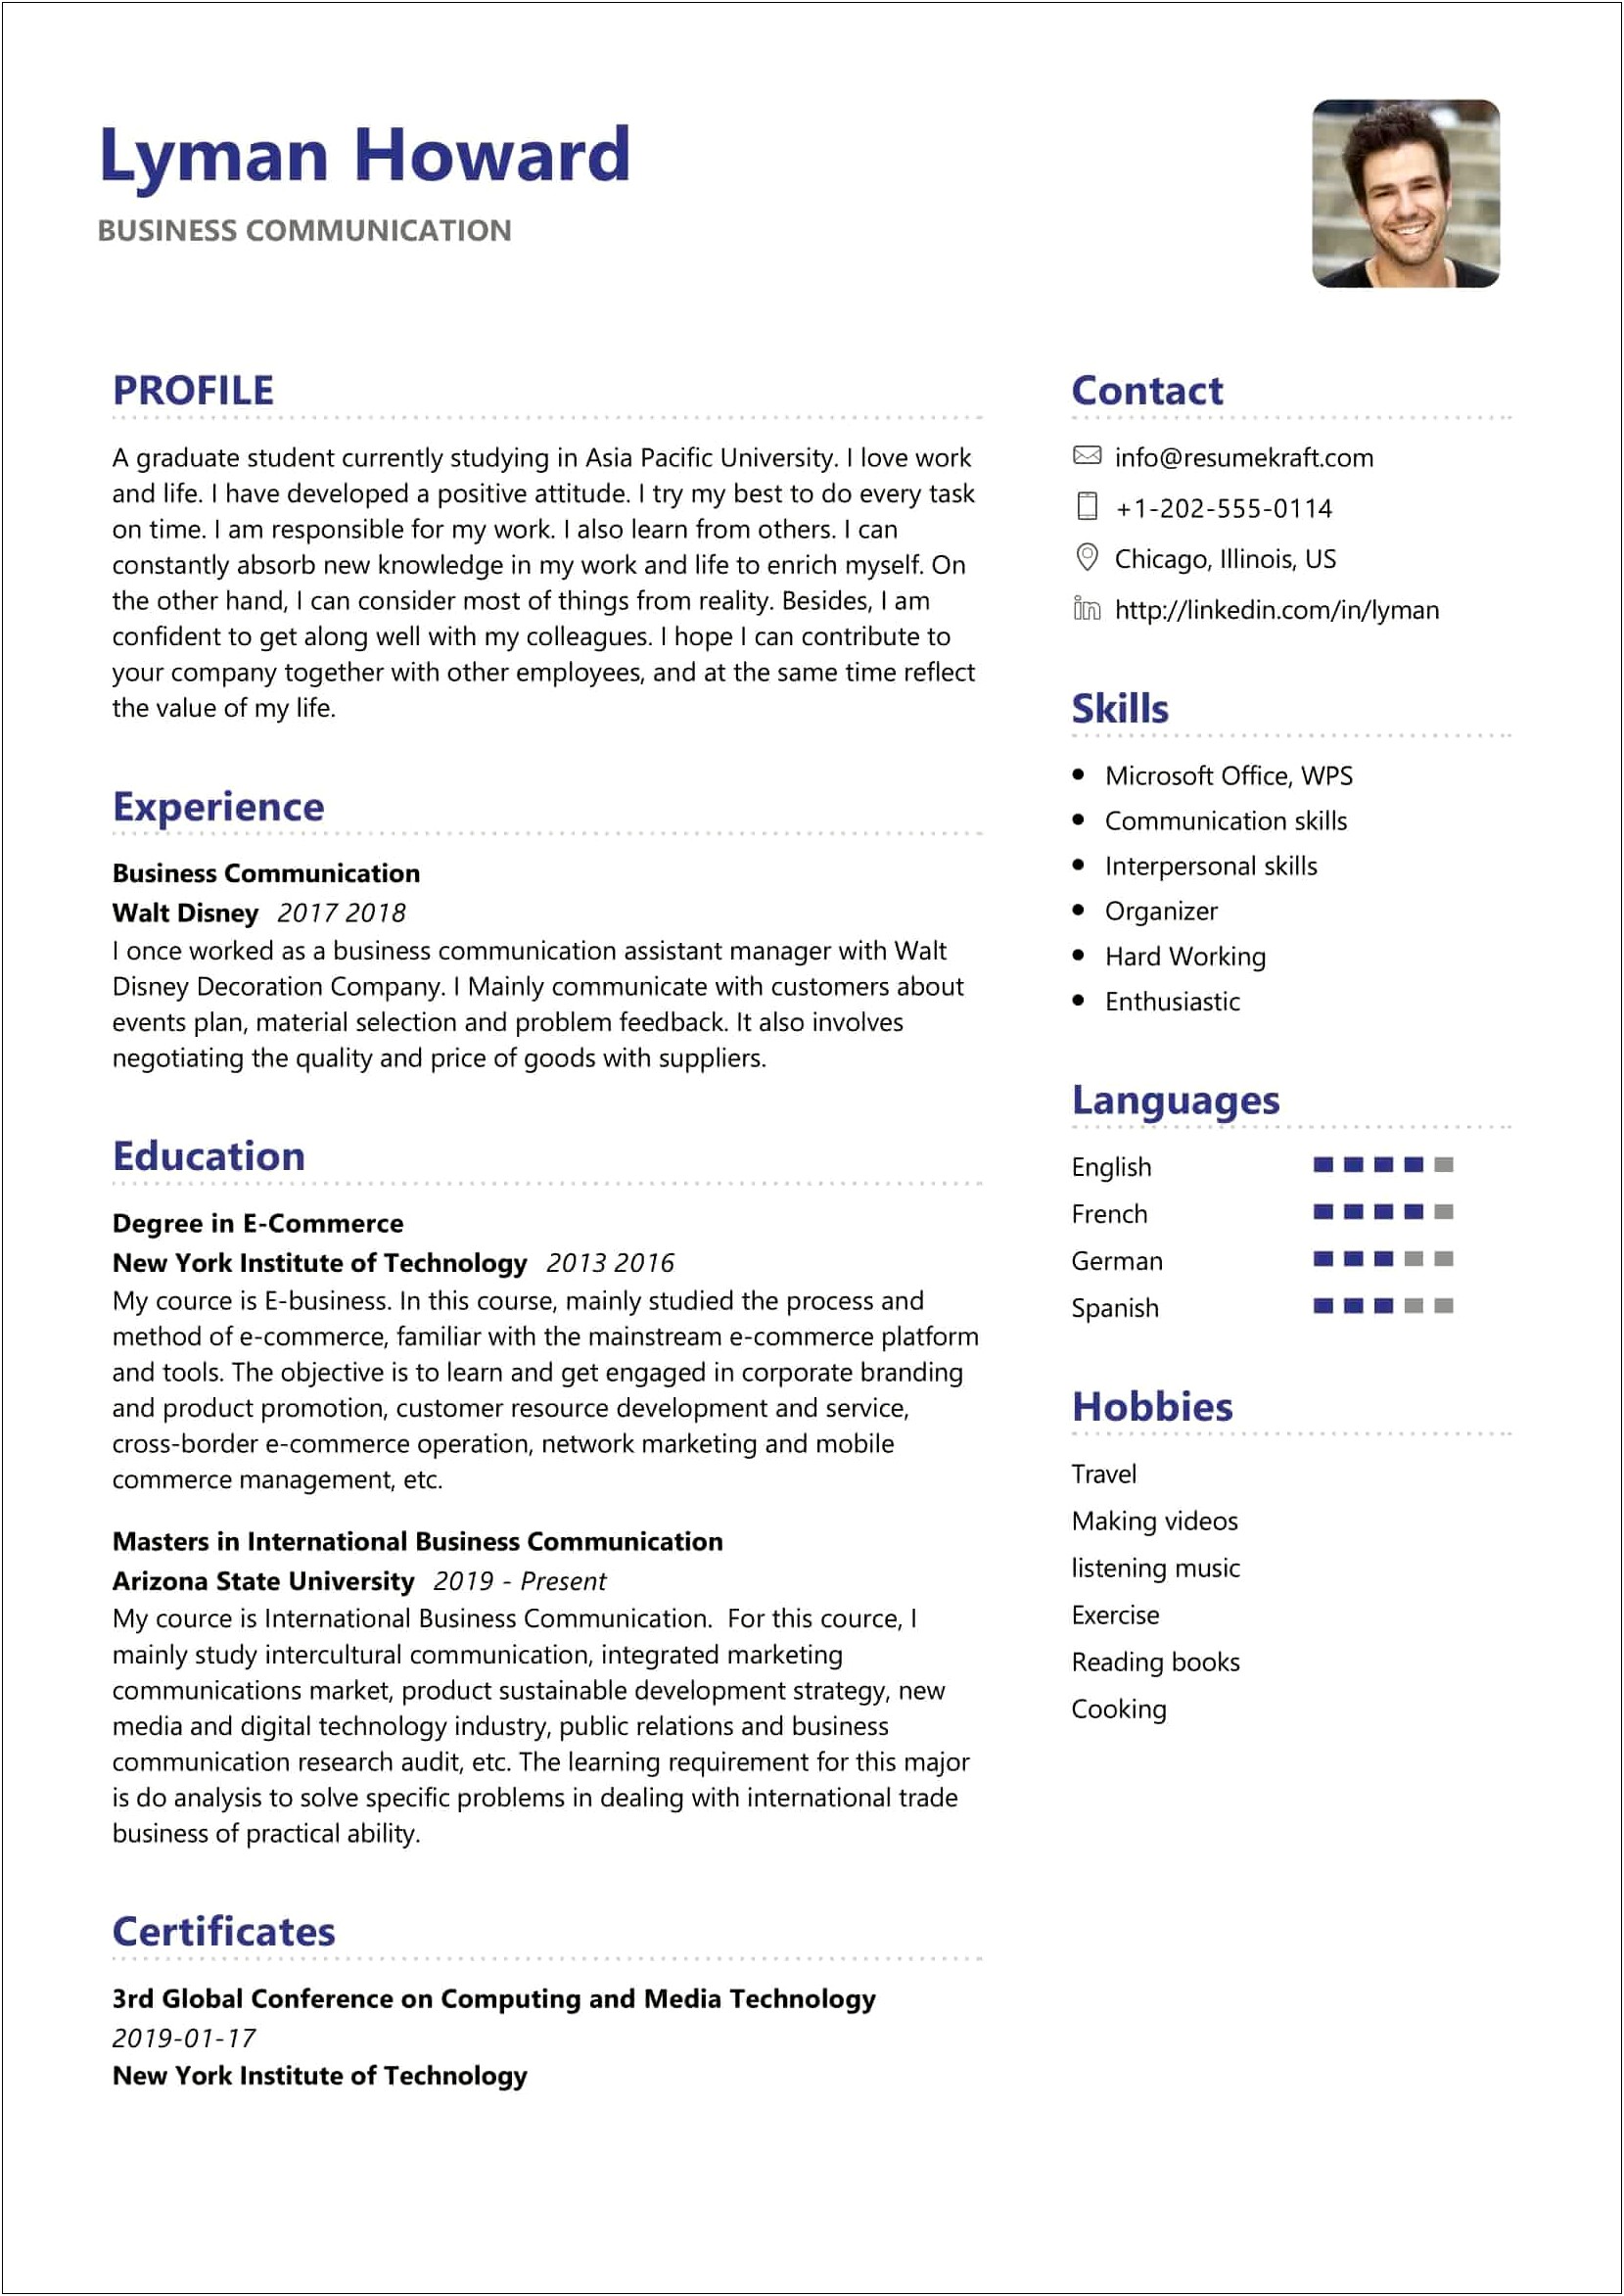 Sample Of Resumes To Include In Business Proposals